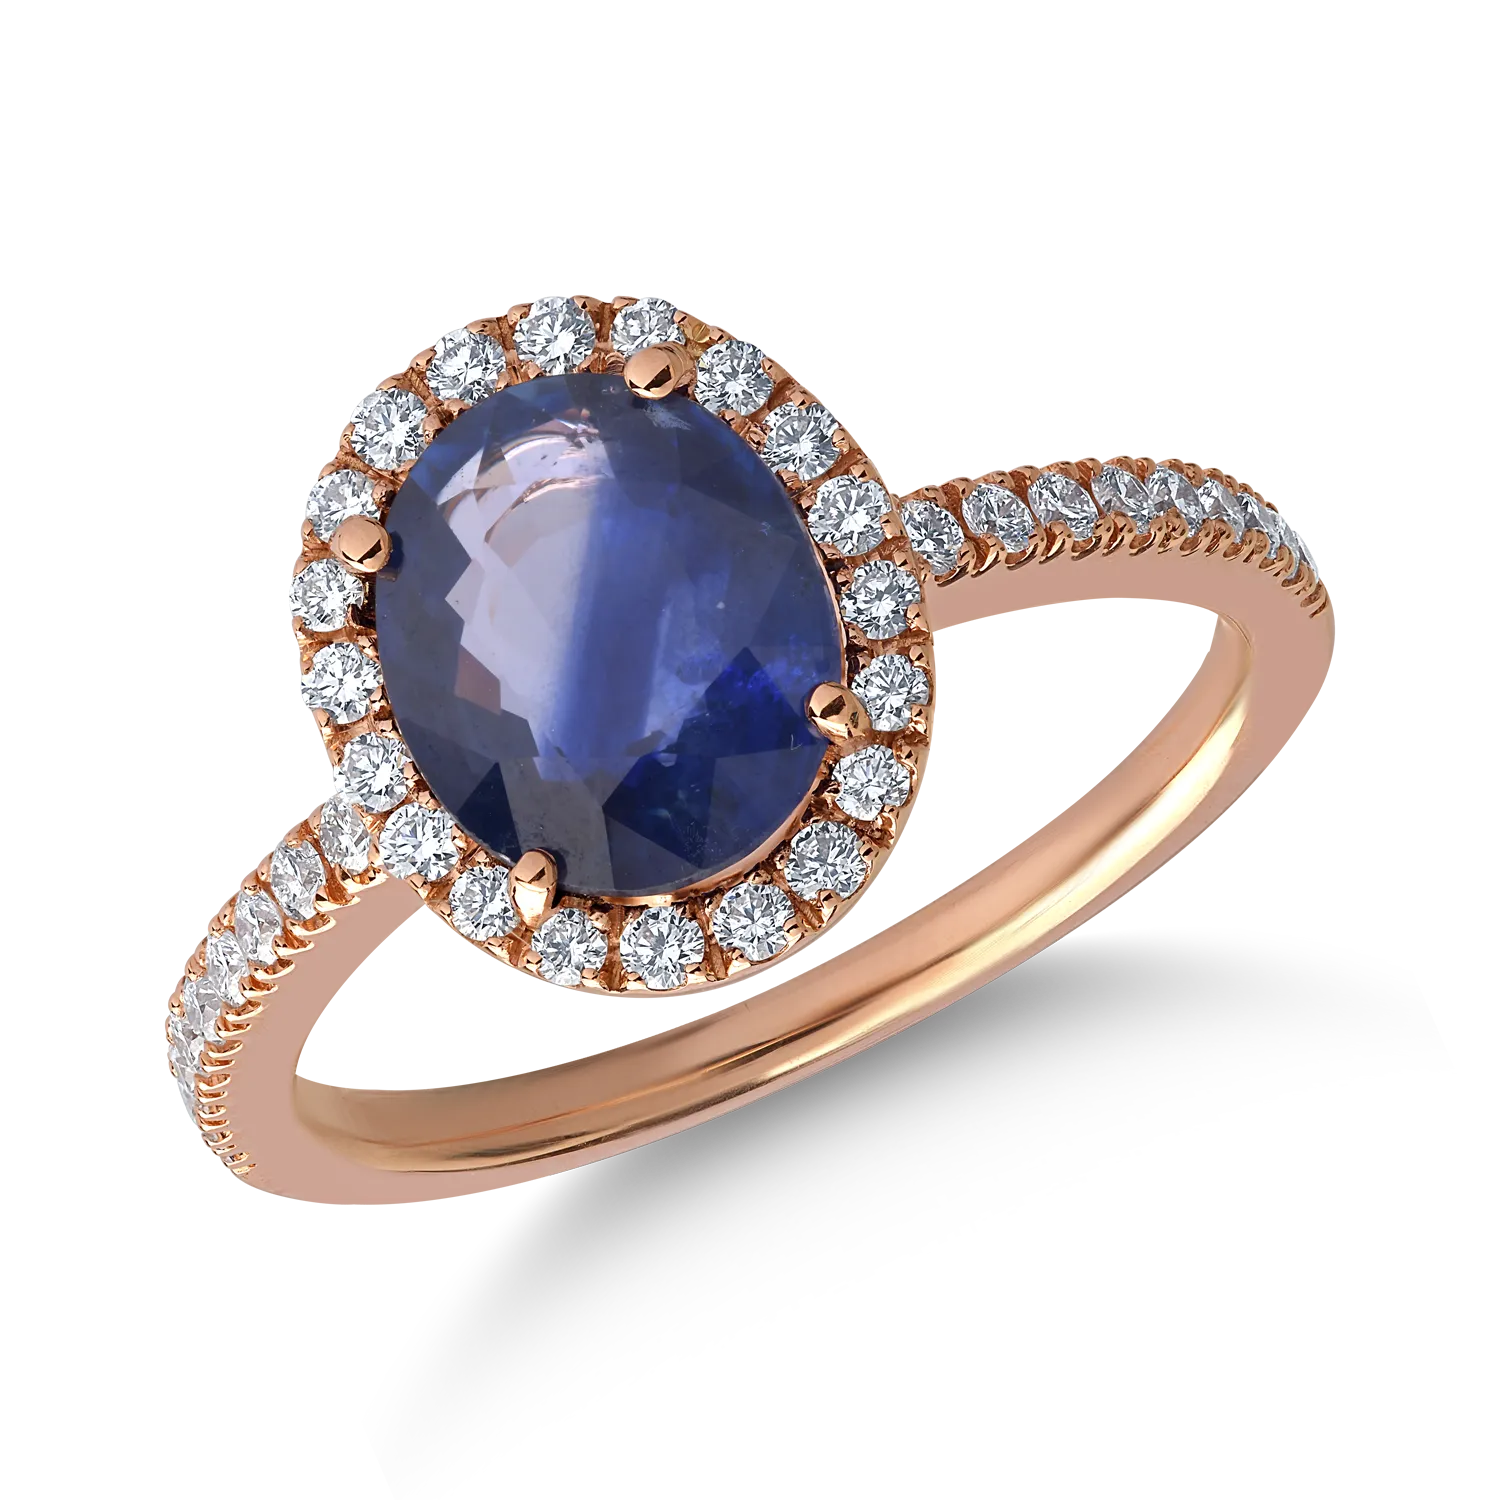 18K rose gold ring with 2.19ct sapphire and 0.35ct diamonds